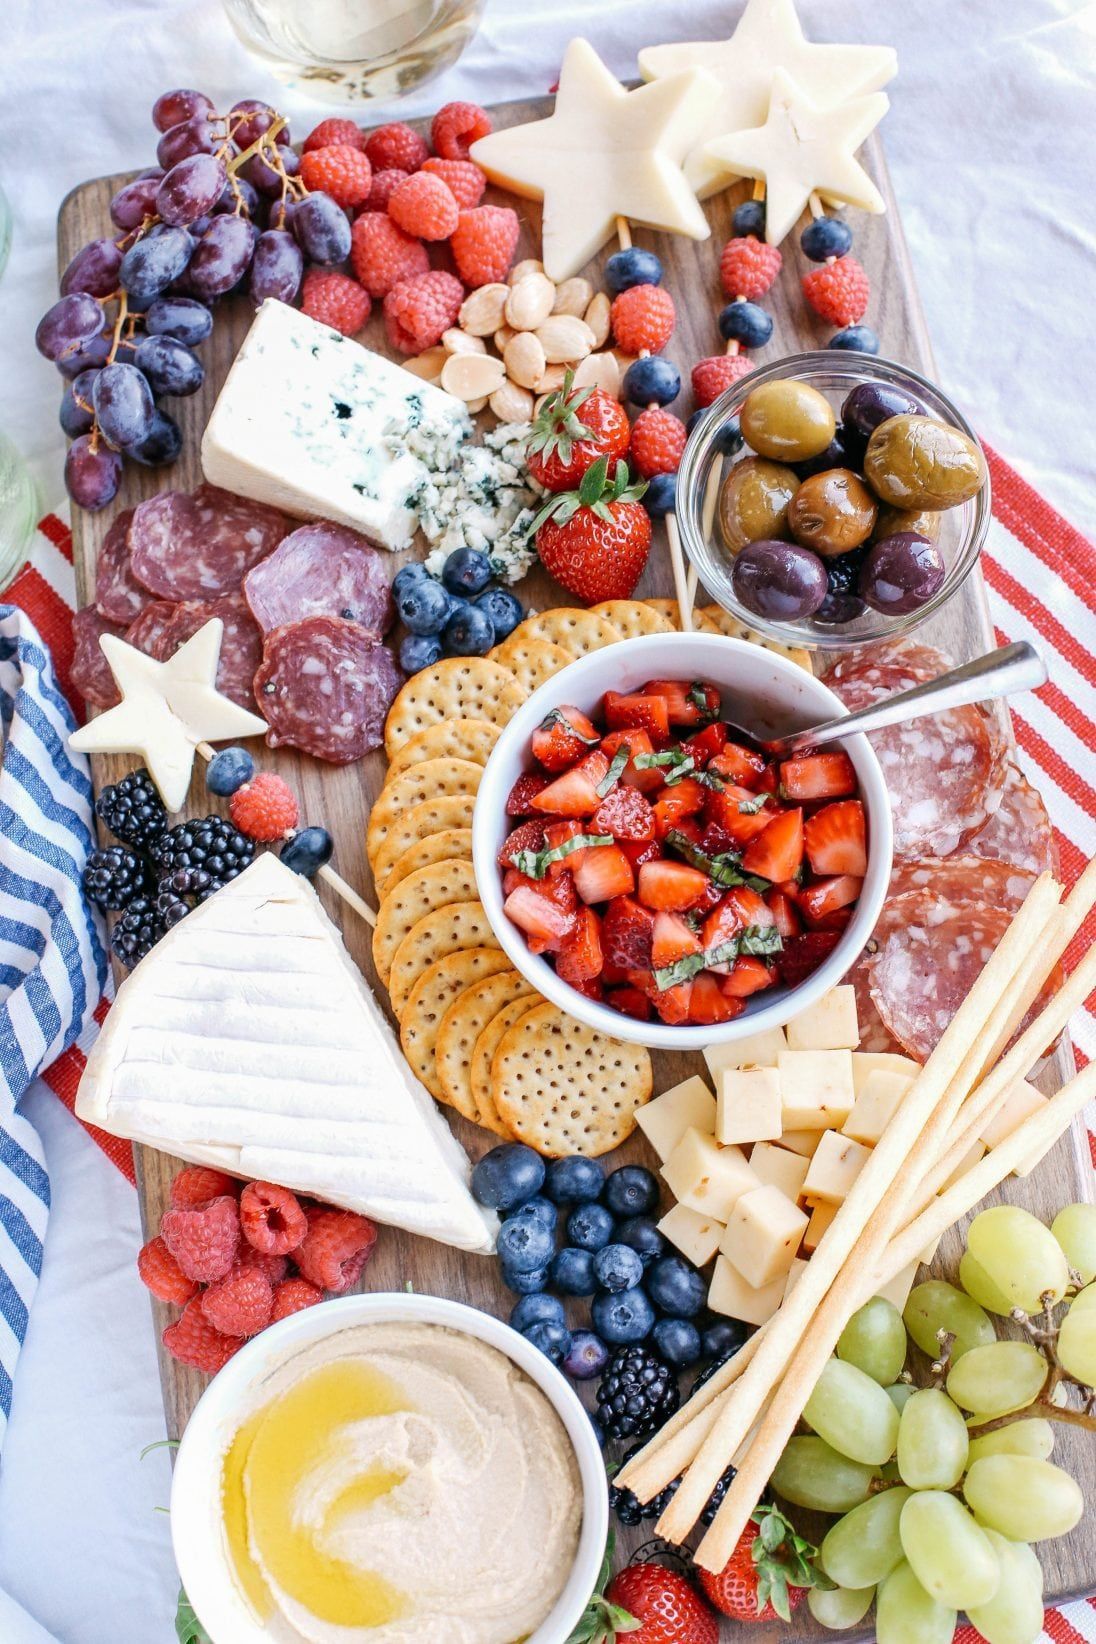 21 Red, White + Blue Things You Should Make for the 4th of July - 21 Red, White + Blue Things You Should Make for the 4th of July -   July 4th food Ideas